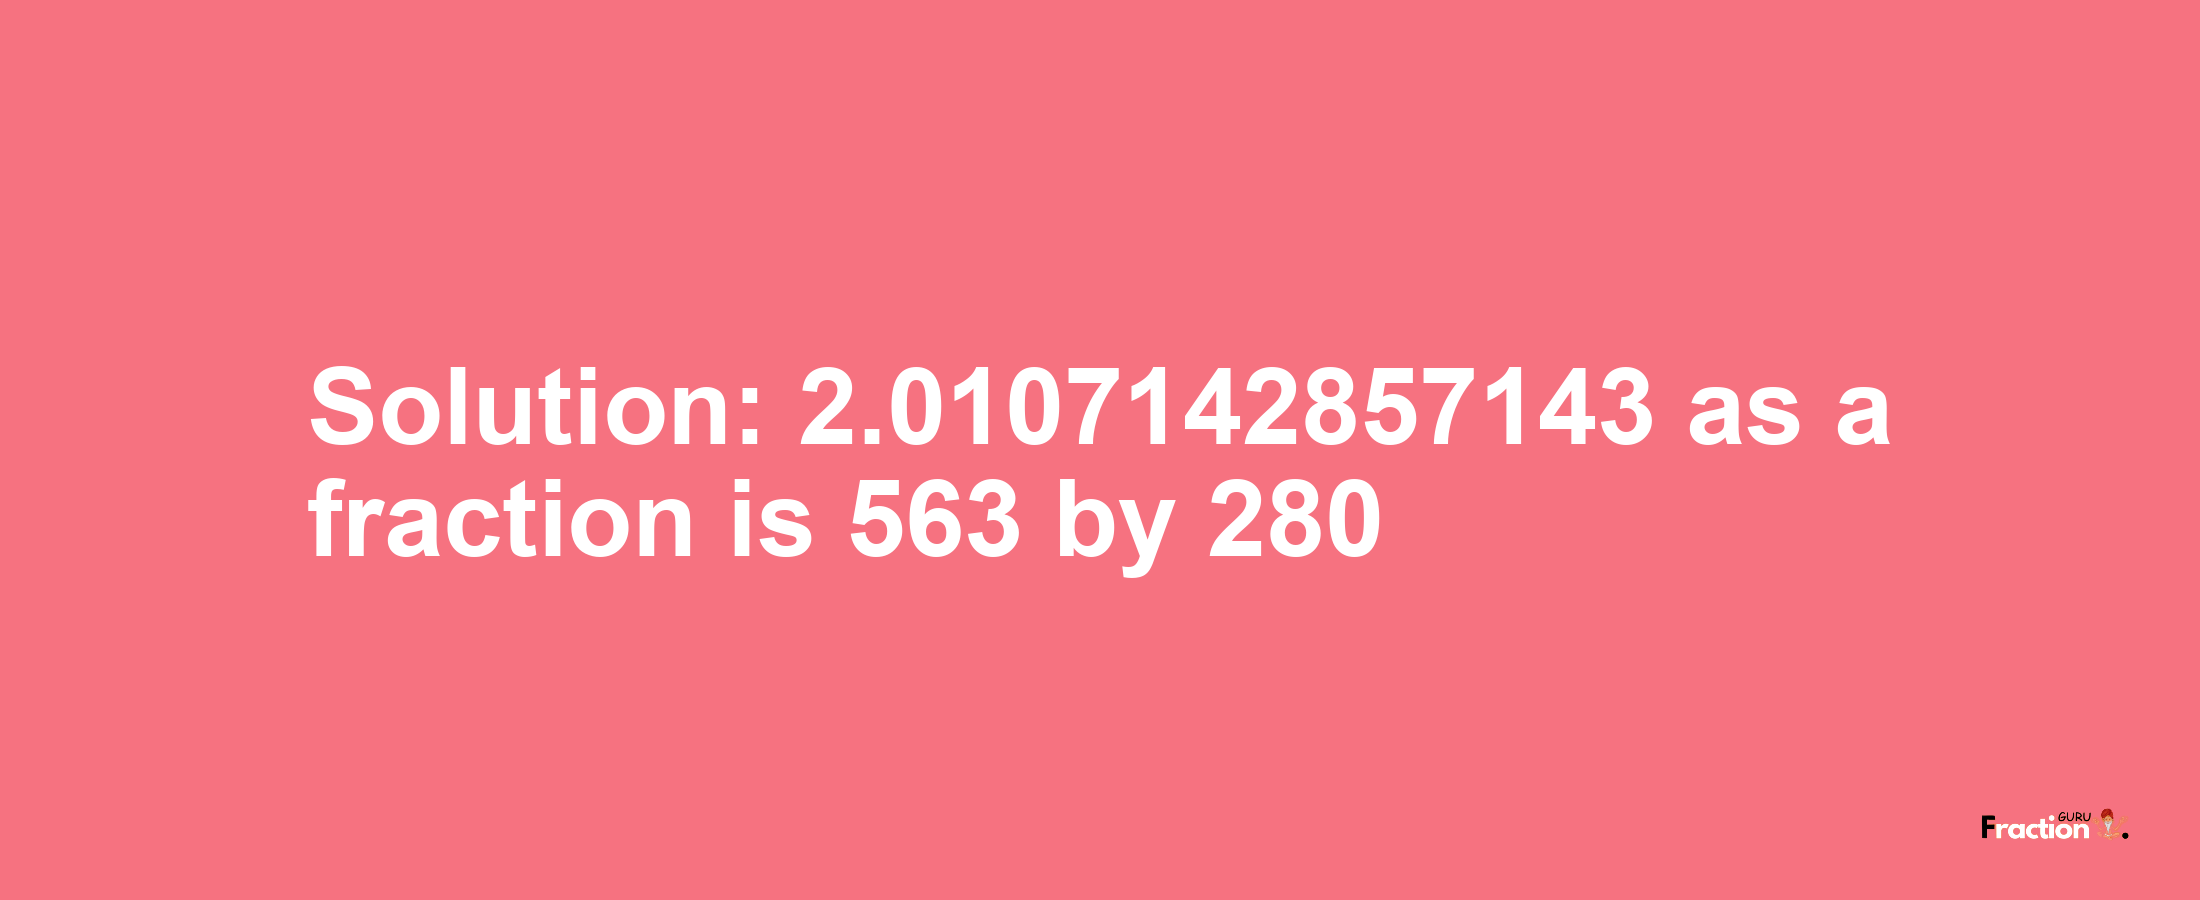 Solution:2.0107142857143 as a fraction is 563/280